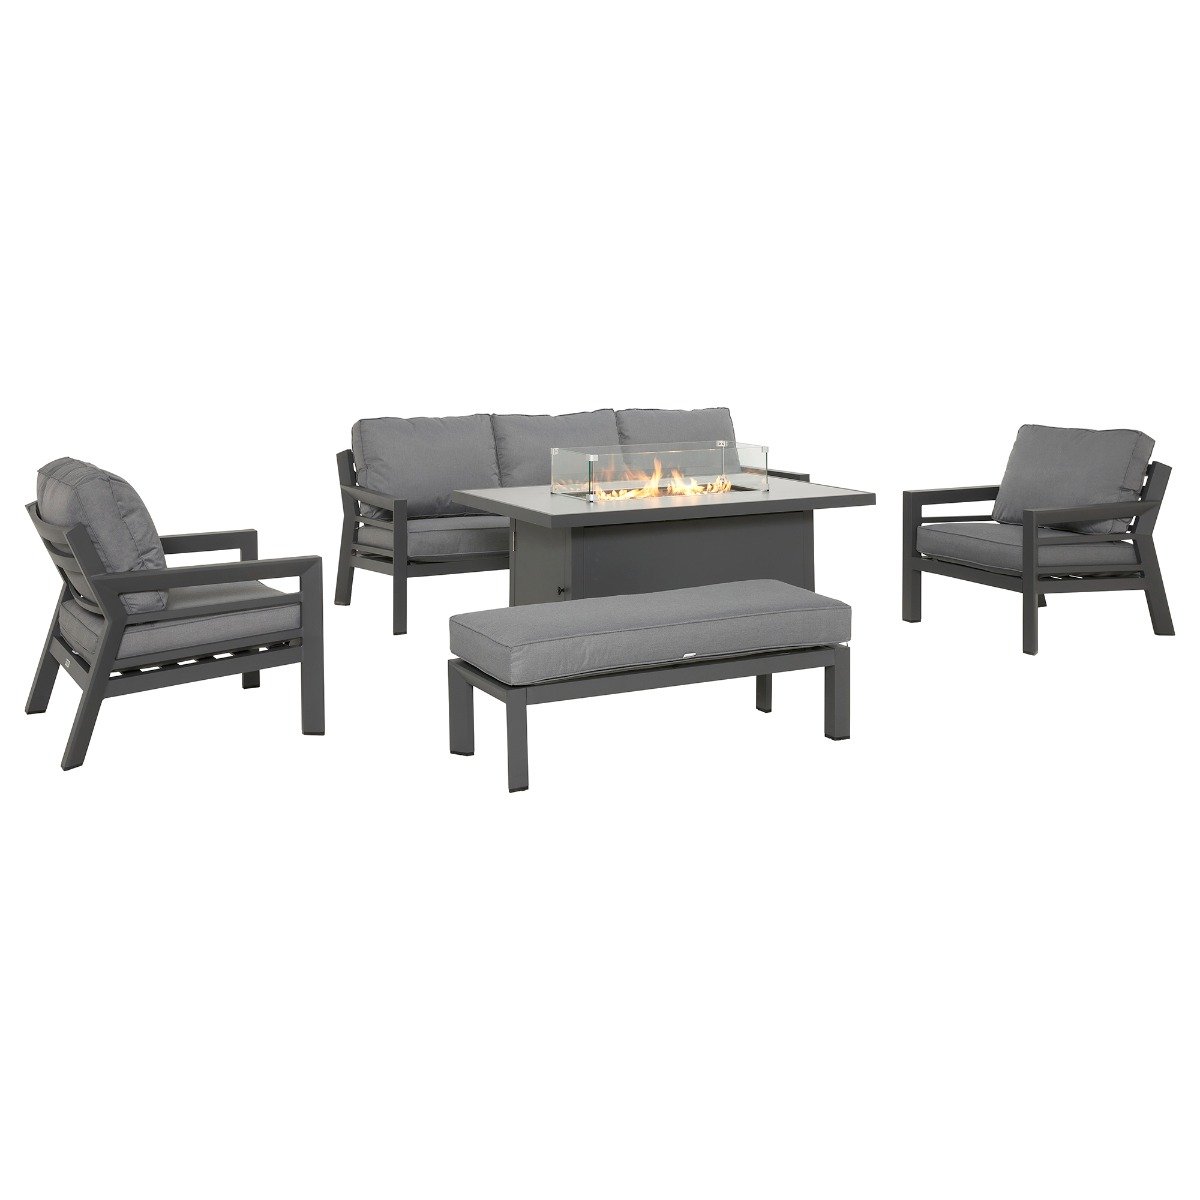 Soho 3 Seat Sofa Dining Set with Fire Pit, Grey | Barker & Stonehouse